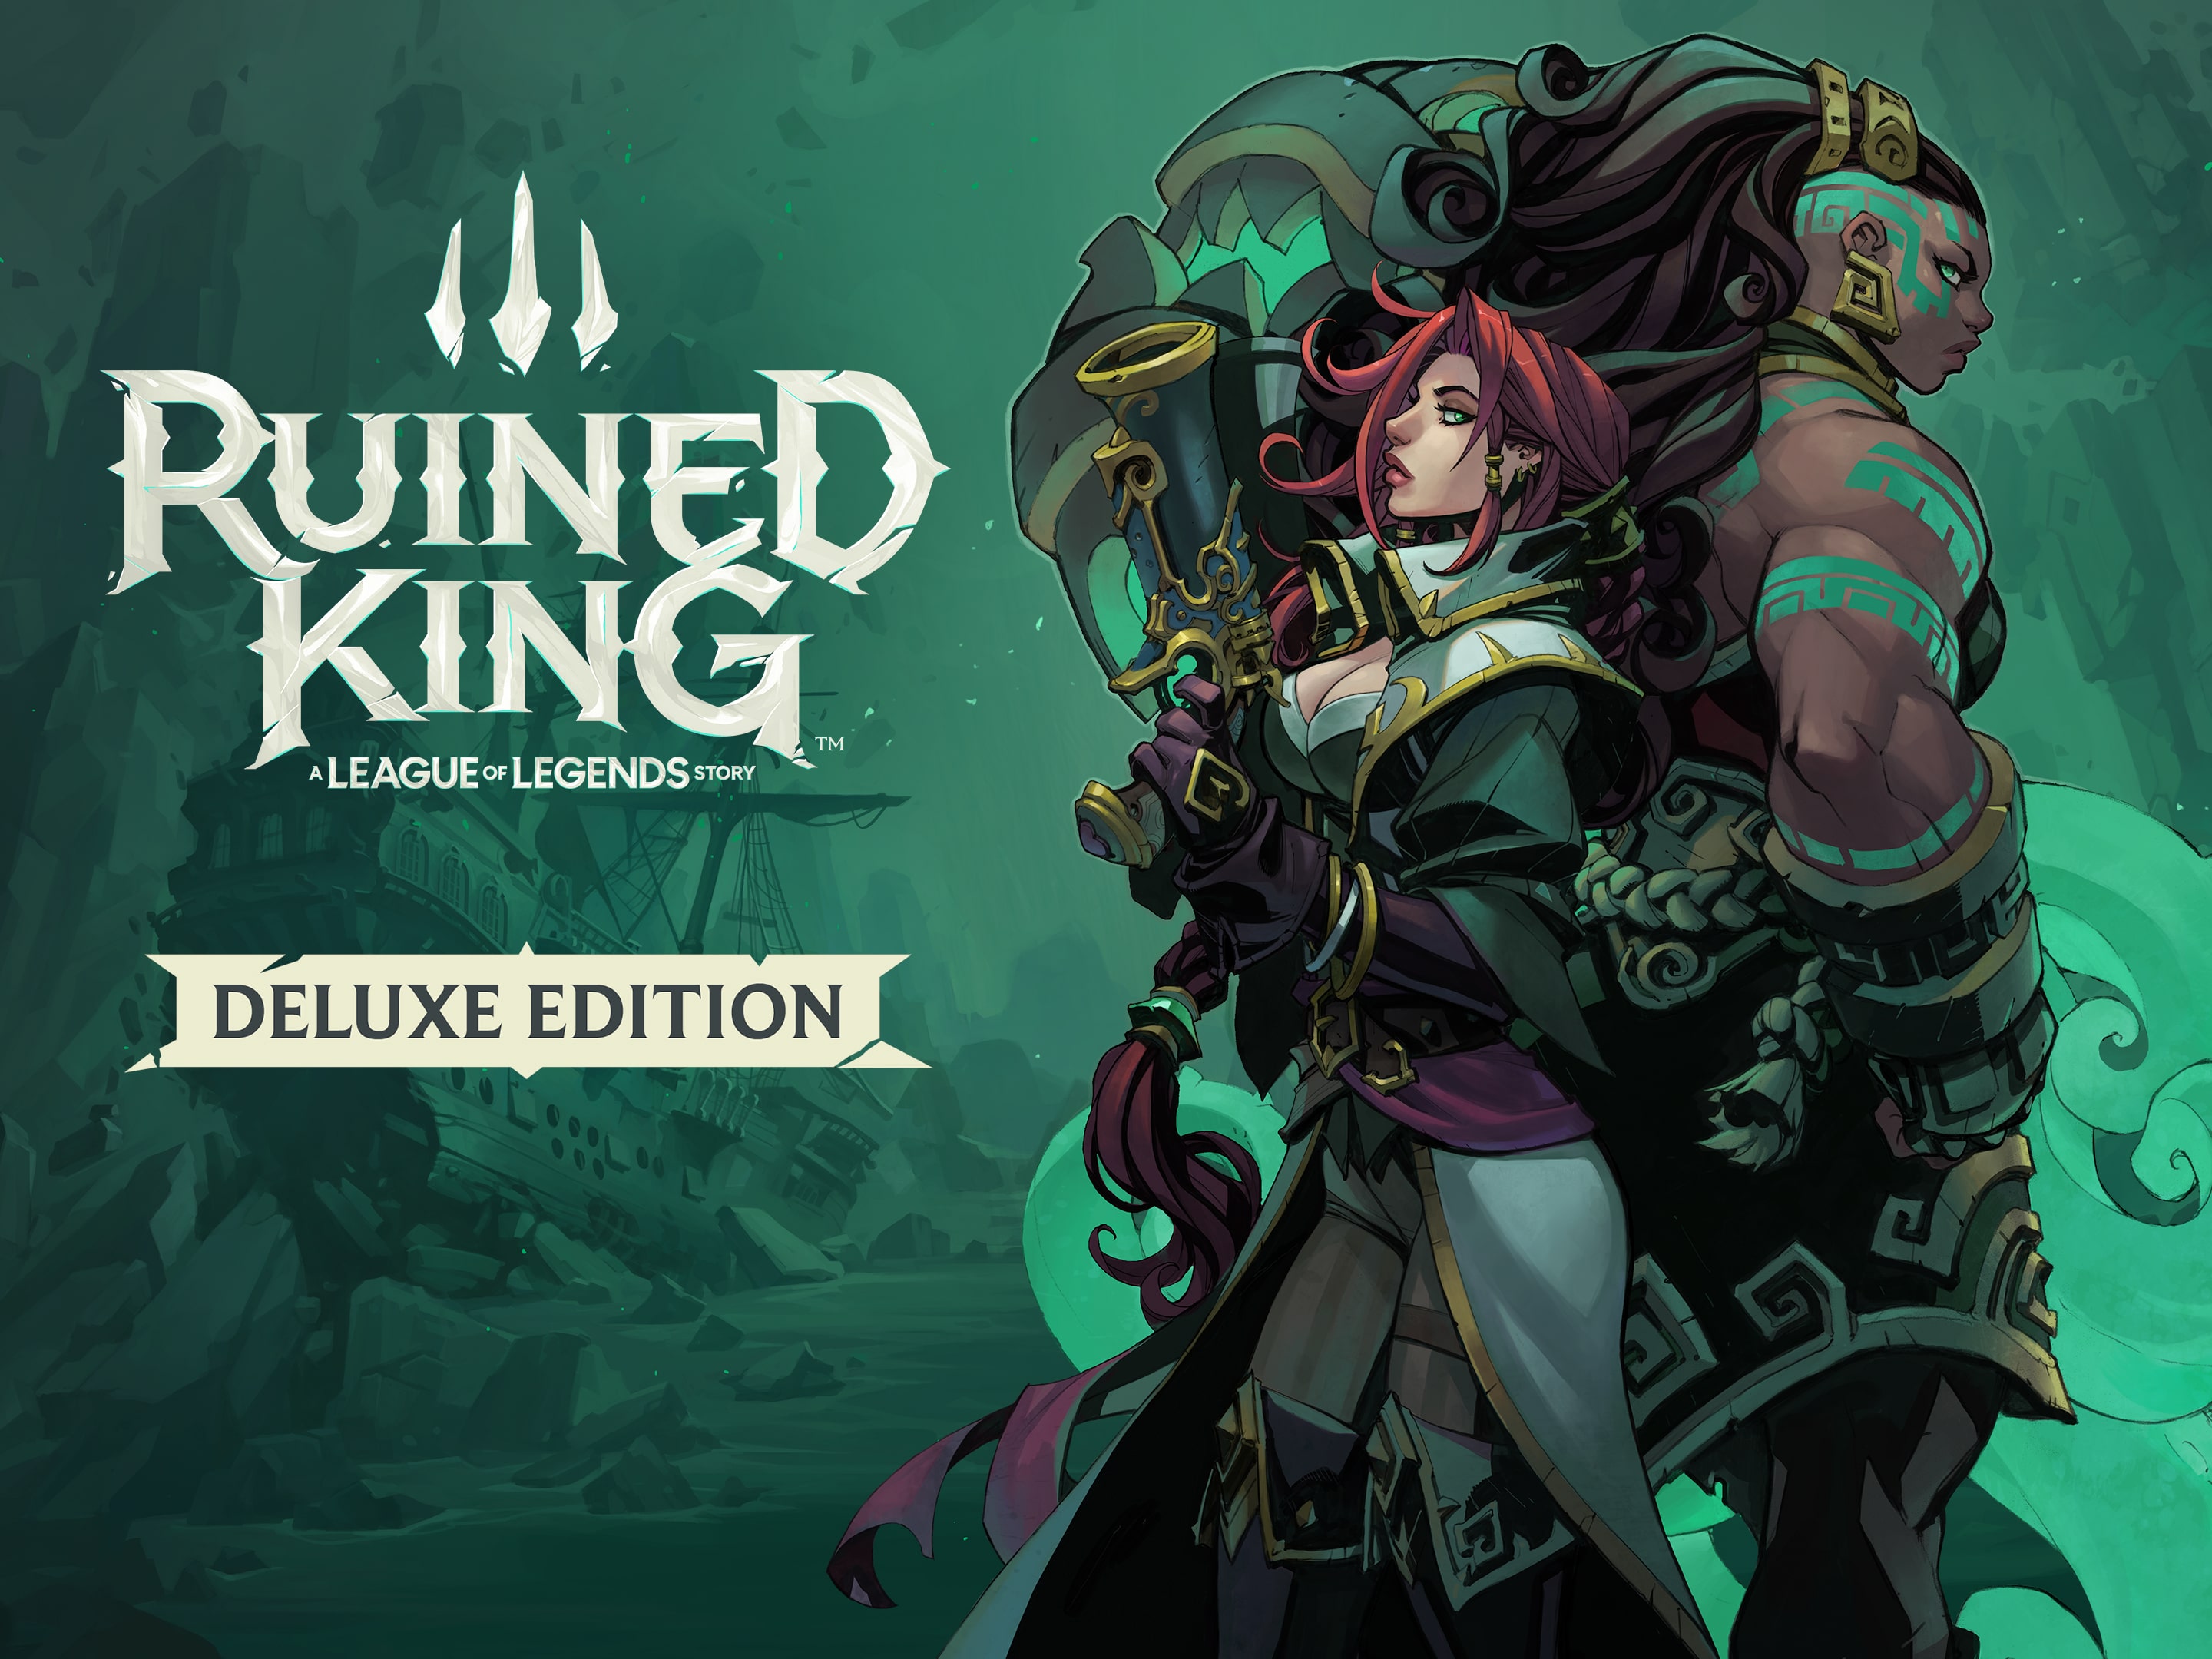 League of Legends' spin-off 'Ruined King' suddenly arrives on consoles and  PC